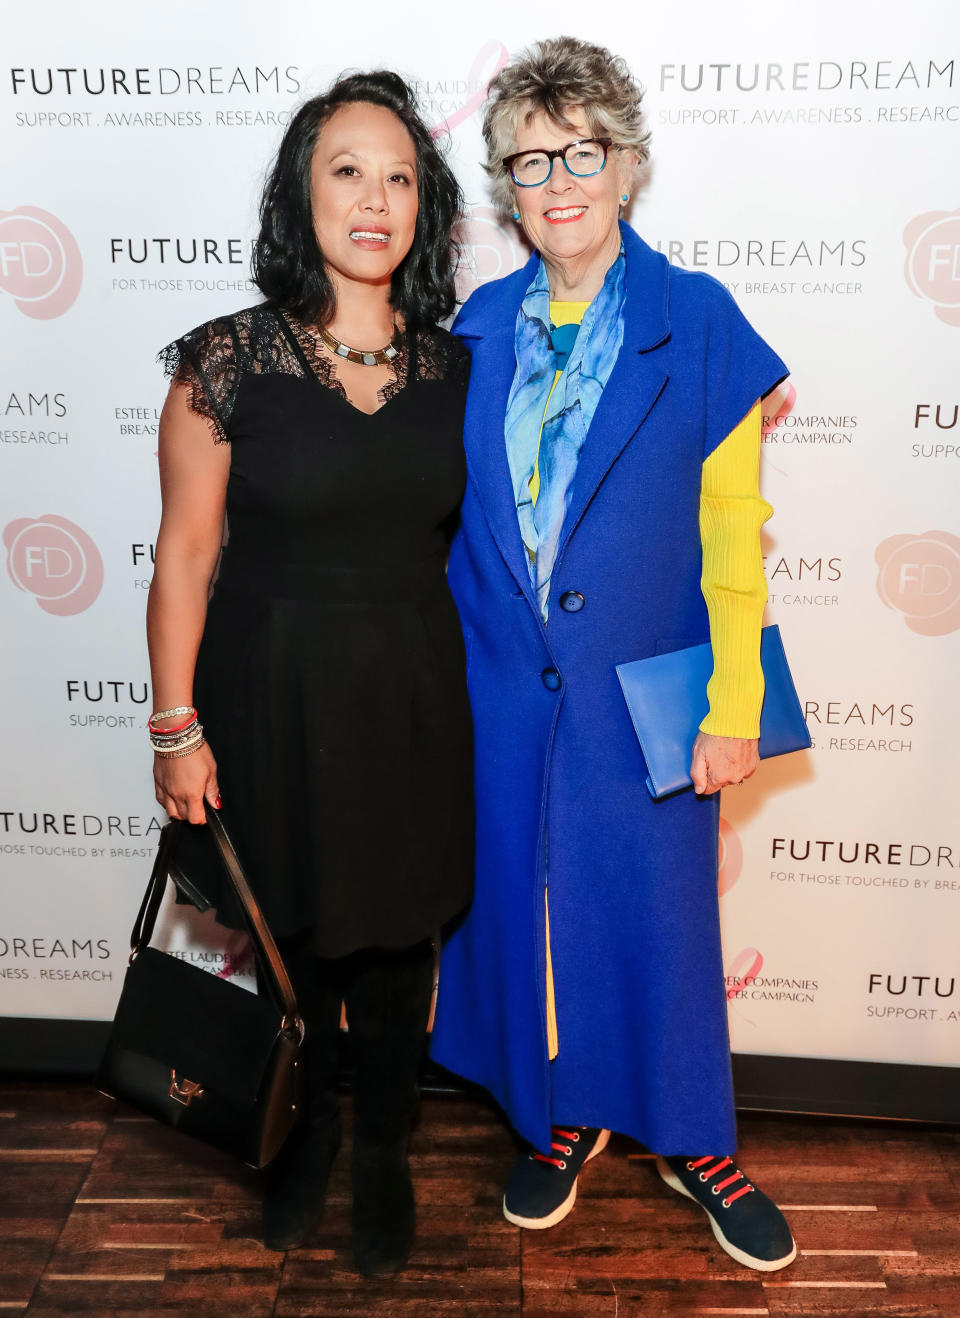 Li-Da Kruger and Prue Leith attend the Future Dreams International Women's Day Tea supported by Estee Lauder at The Arts Club on March 9, 2020 in London, England.  (Photo by David M. Benett/Dave Benett/Getty Images)